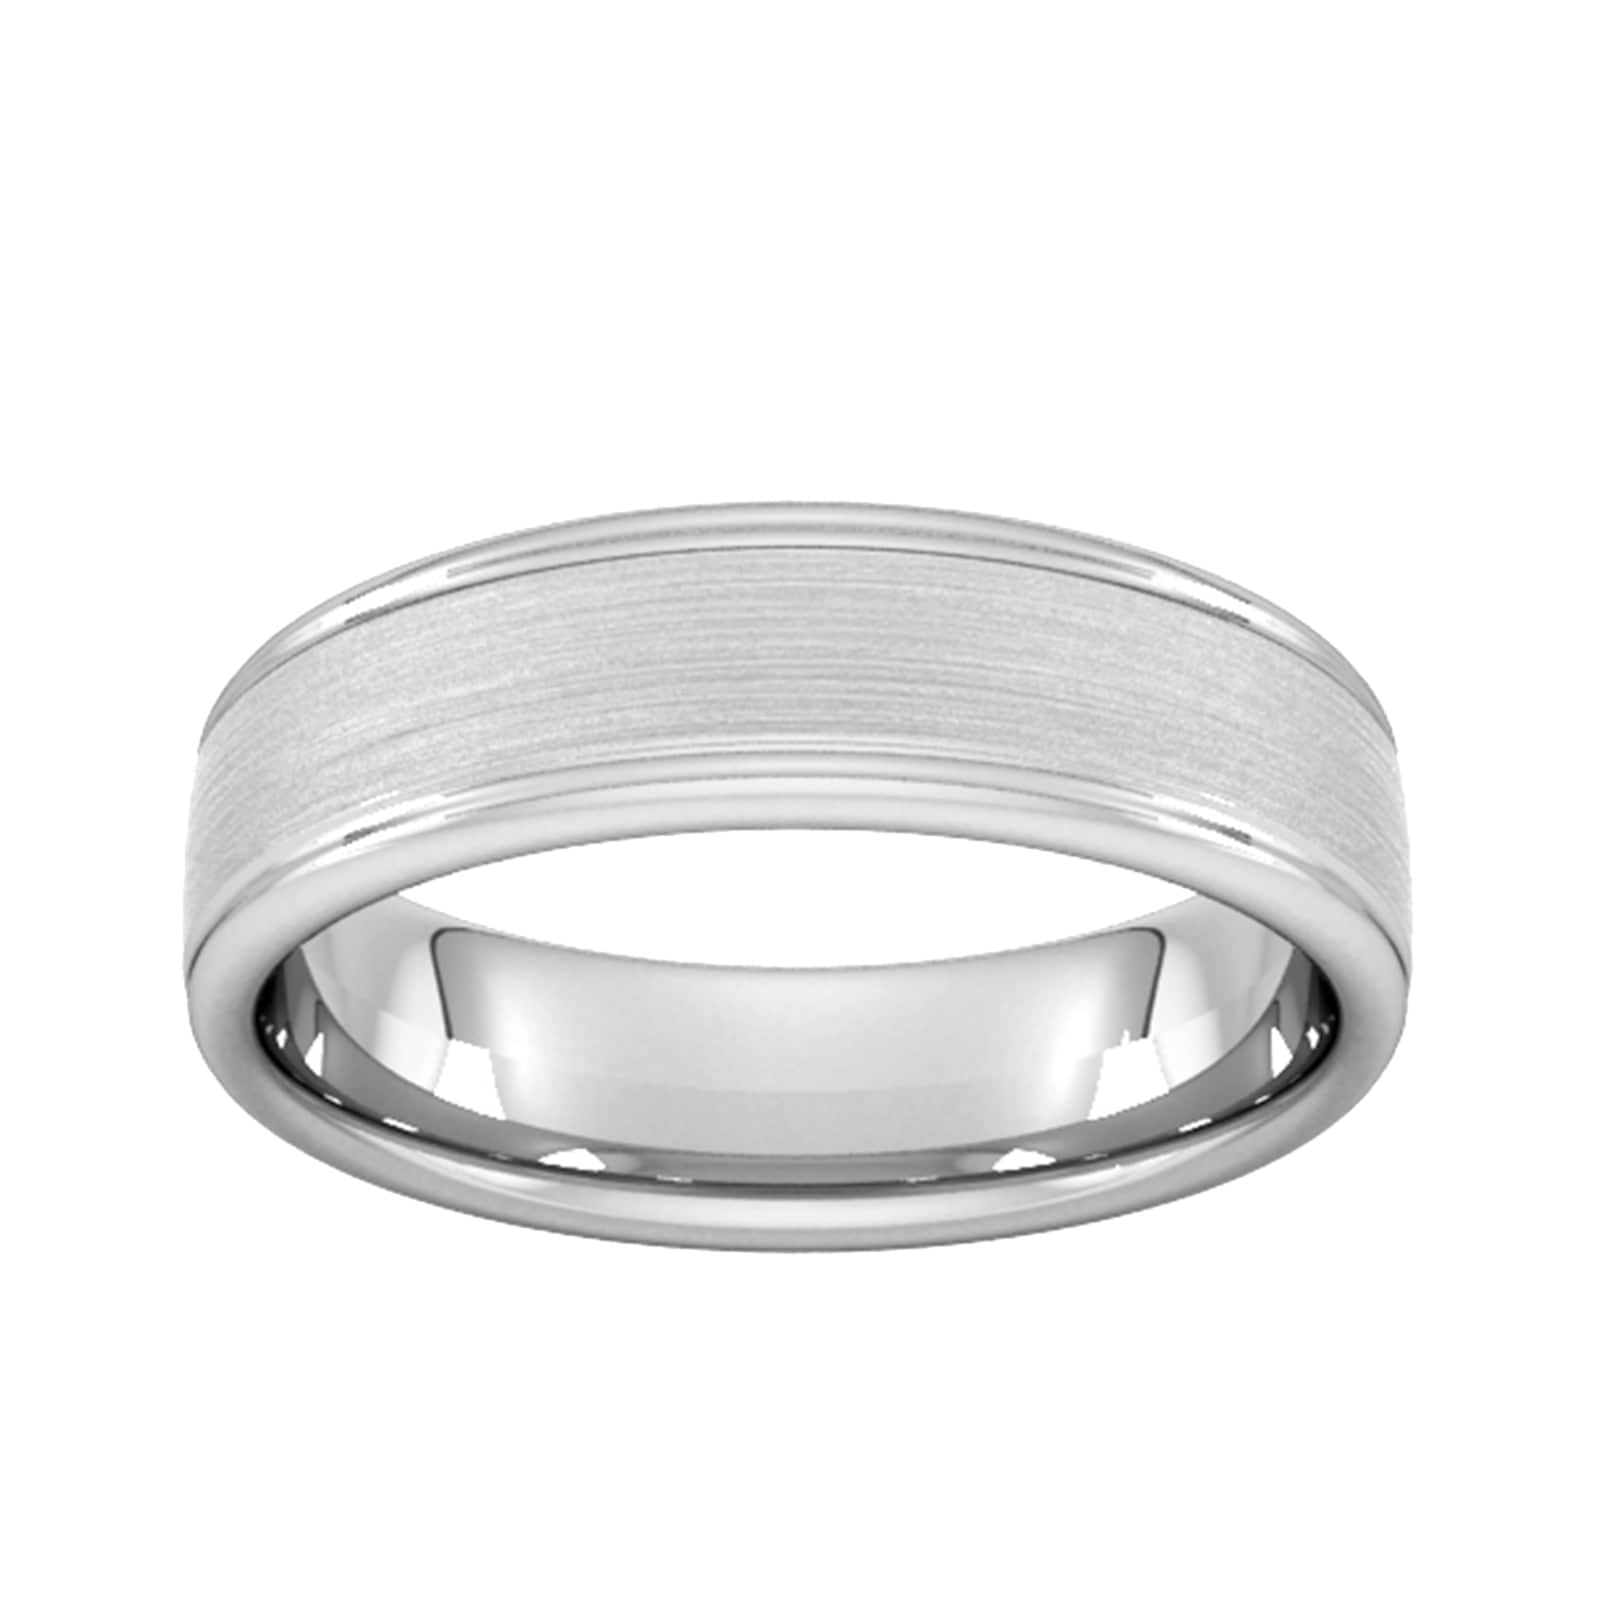 6mm D Shape Standard Matt Centre With Grooves Wedding Ring In 9 Carat White Gold - Ring Size M